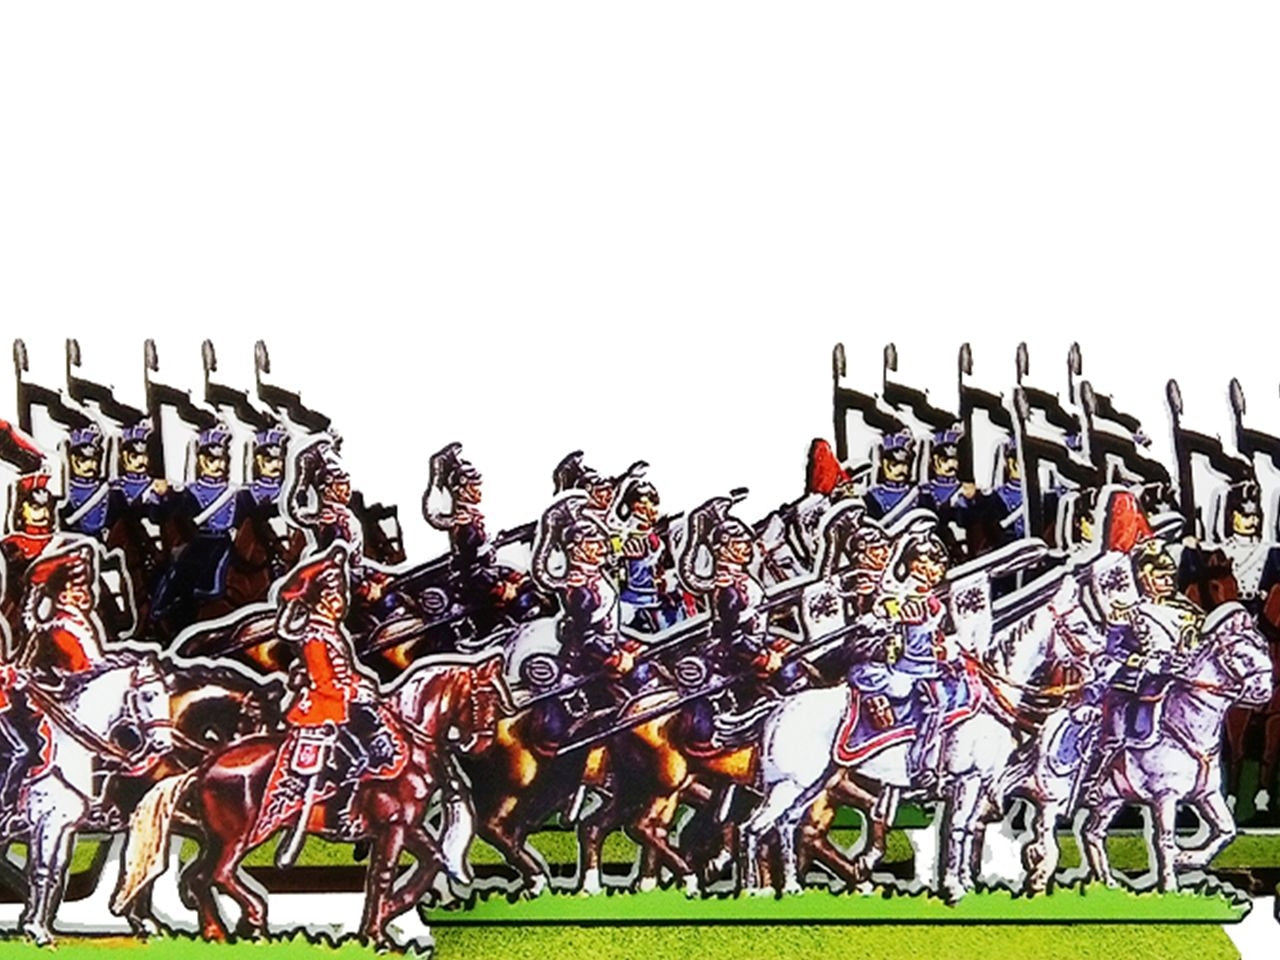 Prussian Hussars and Ulans